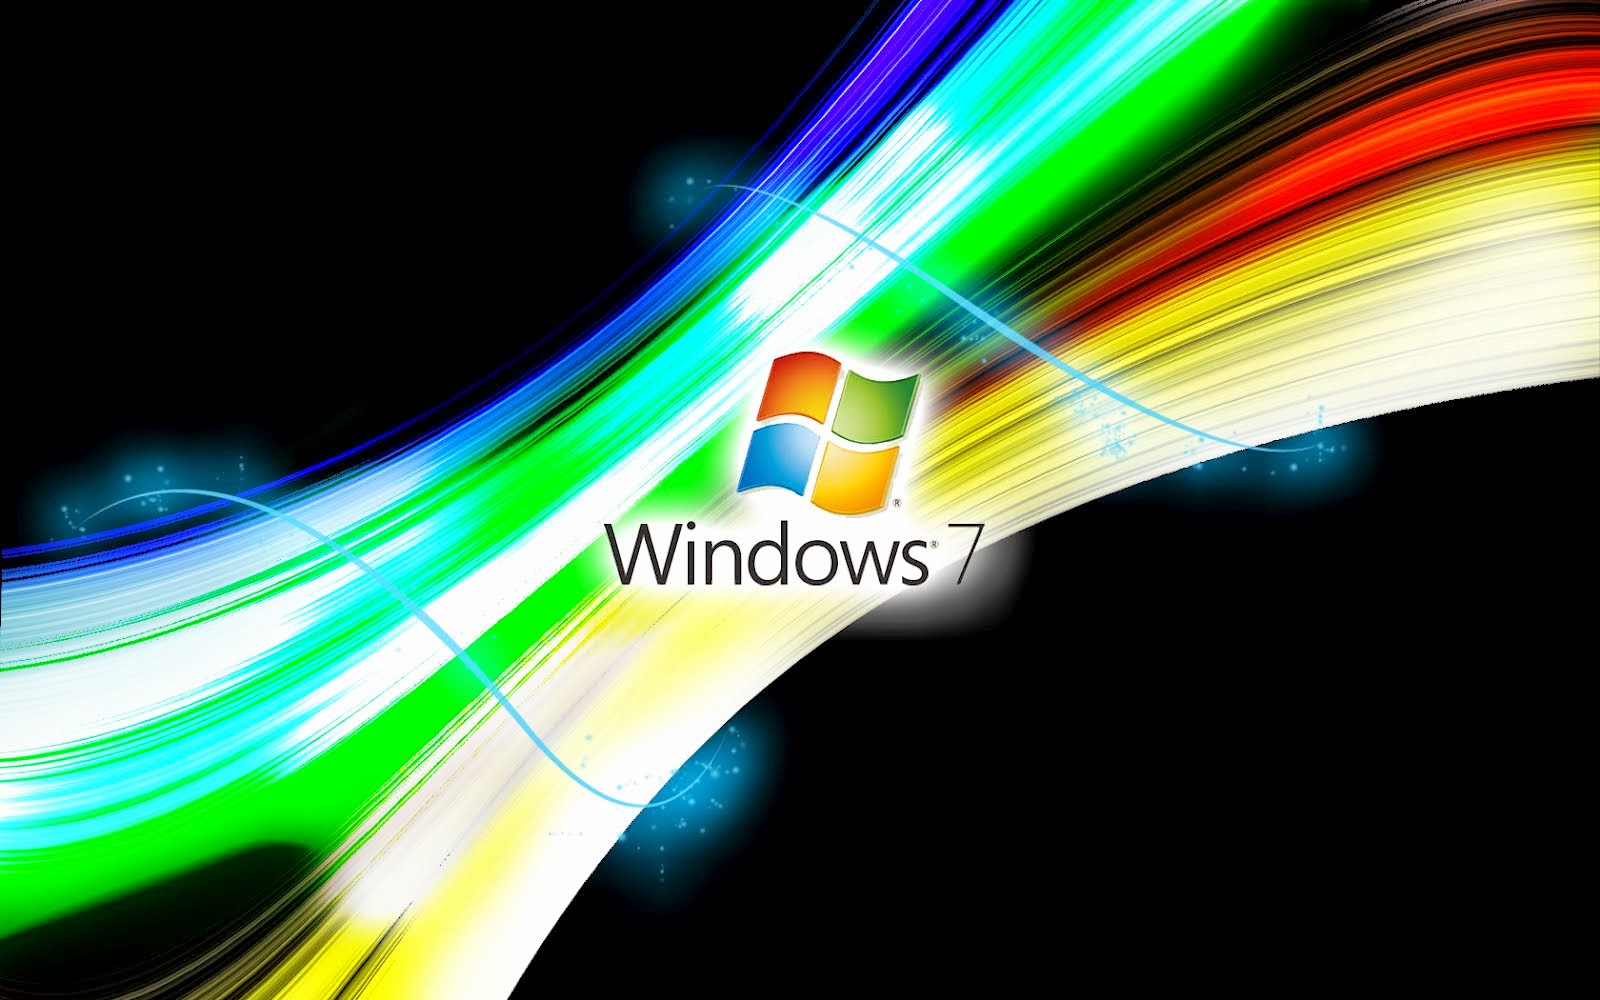 Animated Wallpaper For Windows